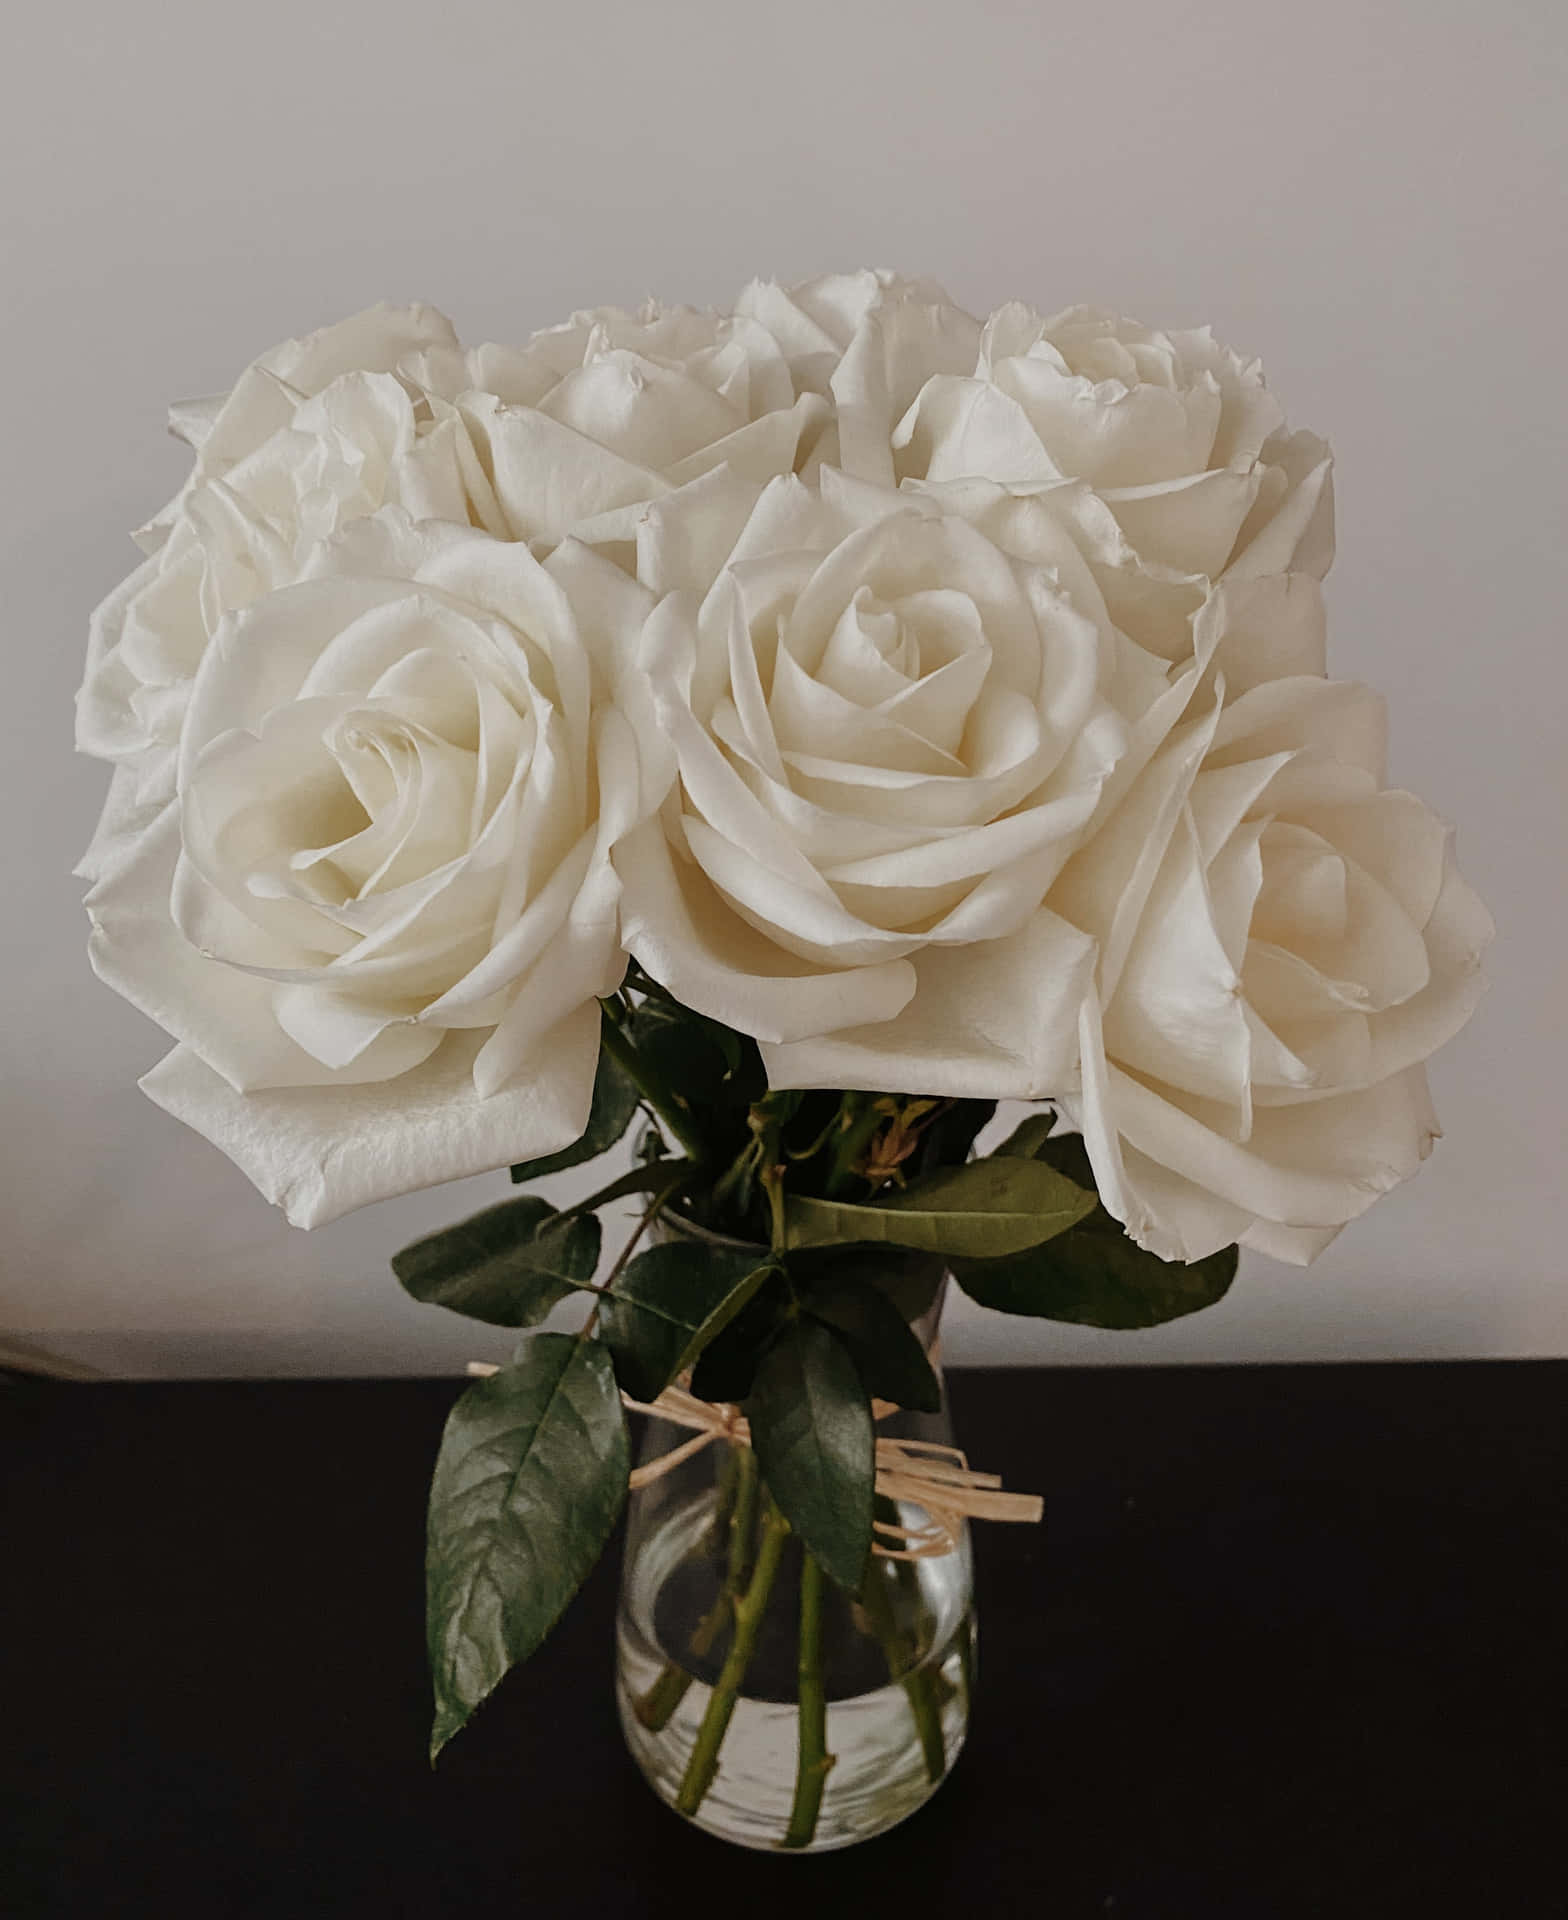 Capivating Allure of White Roses